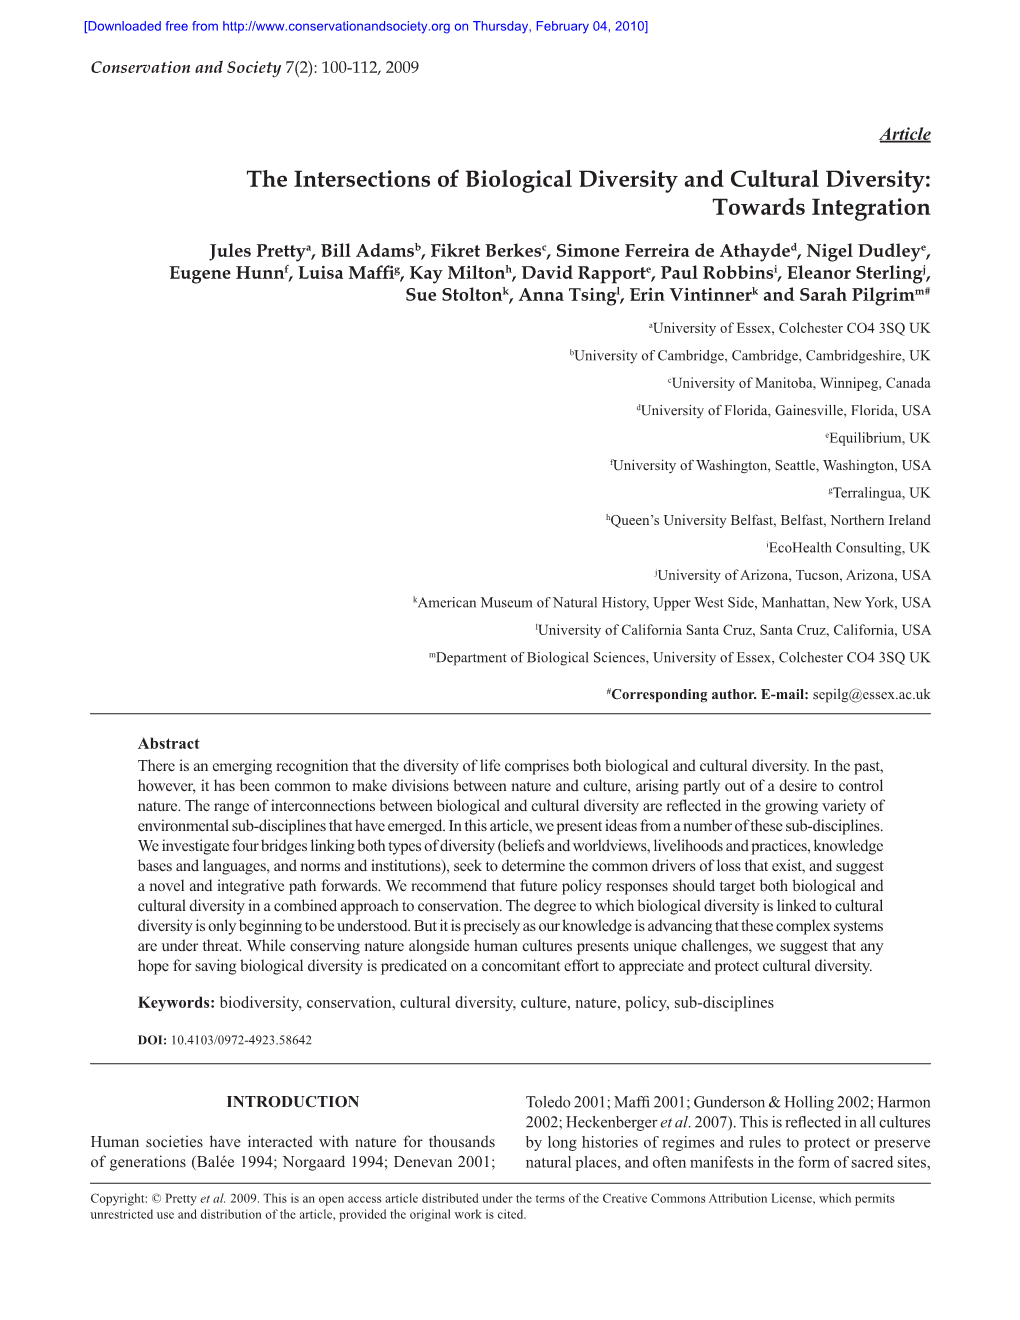 The Intersections of Biological Diversity and Cultural Diversity: Towards Integration